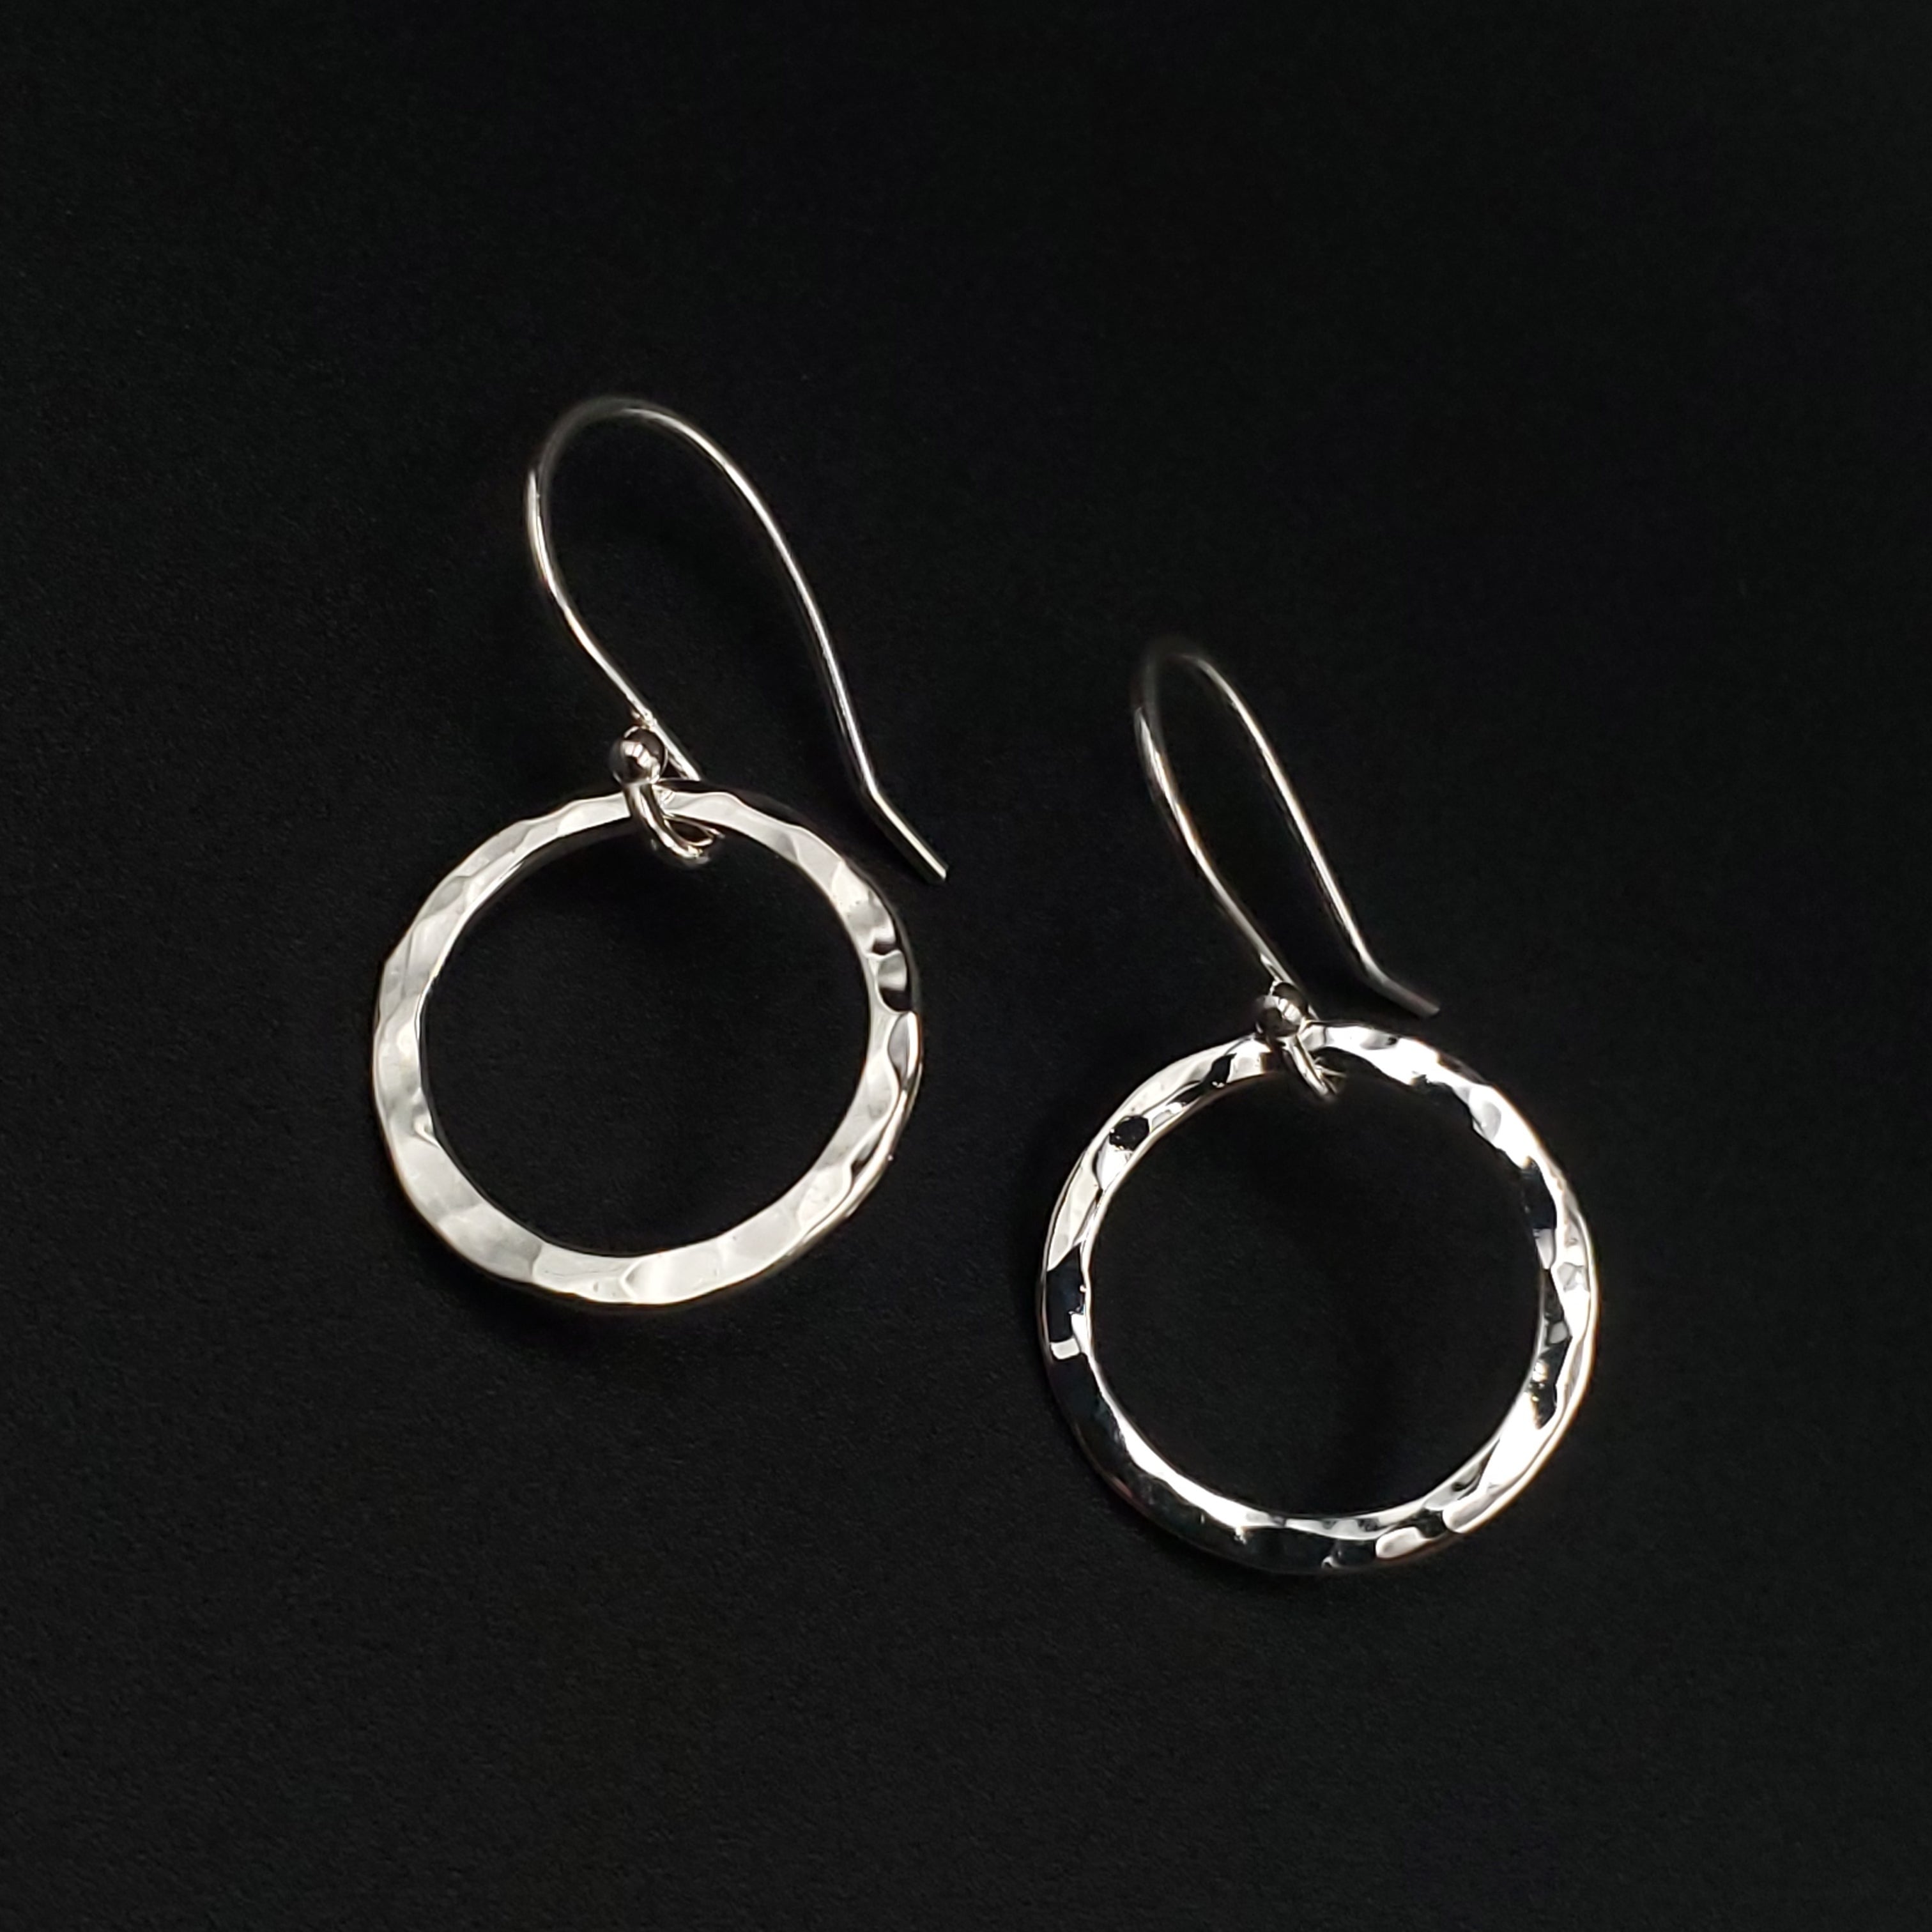 Silver hammered circle earrings